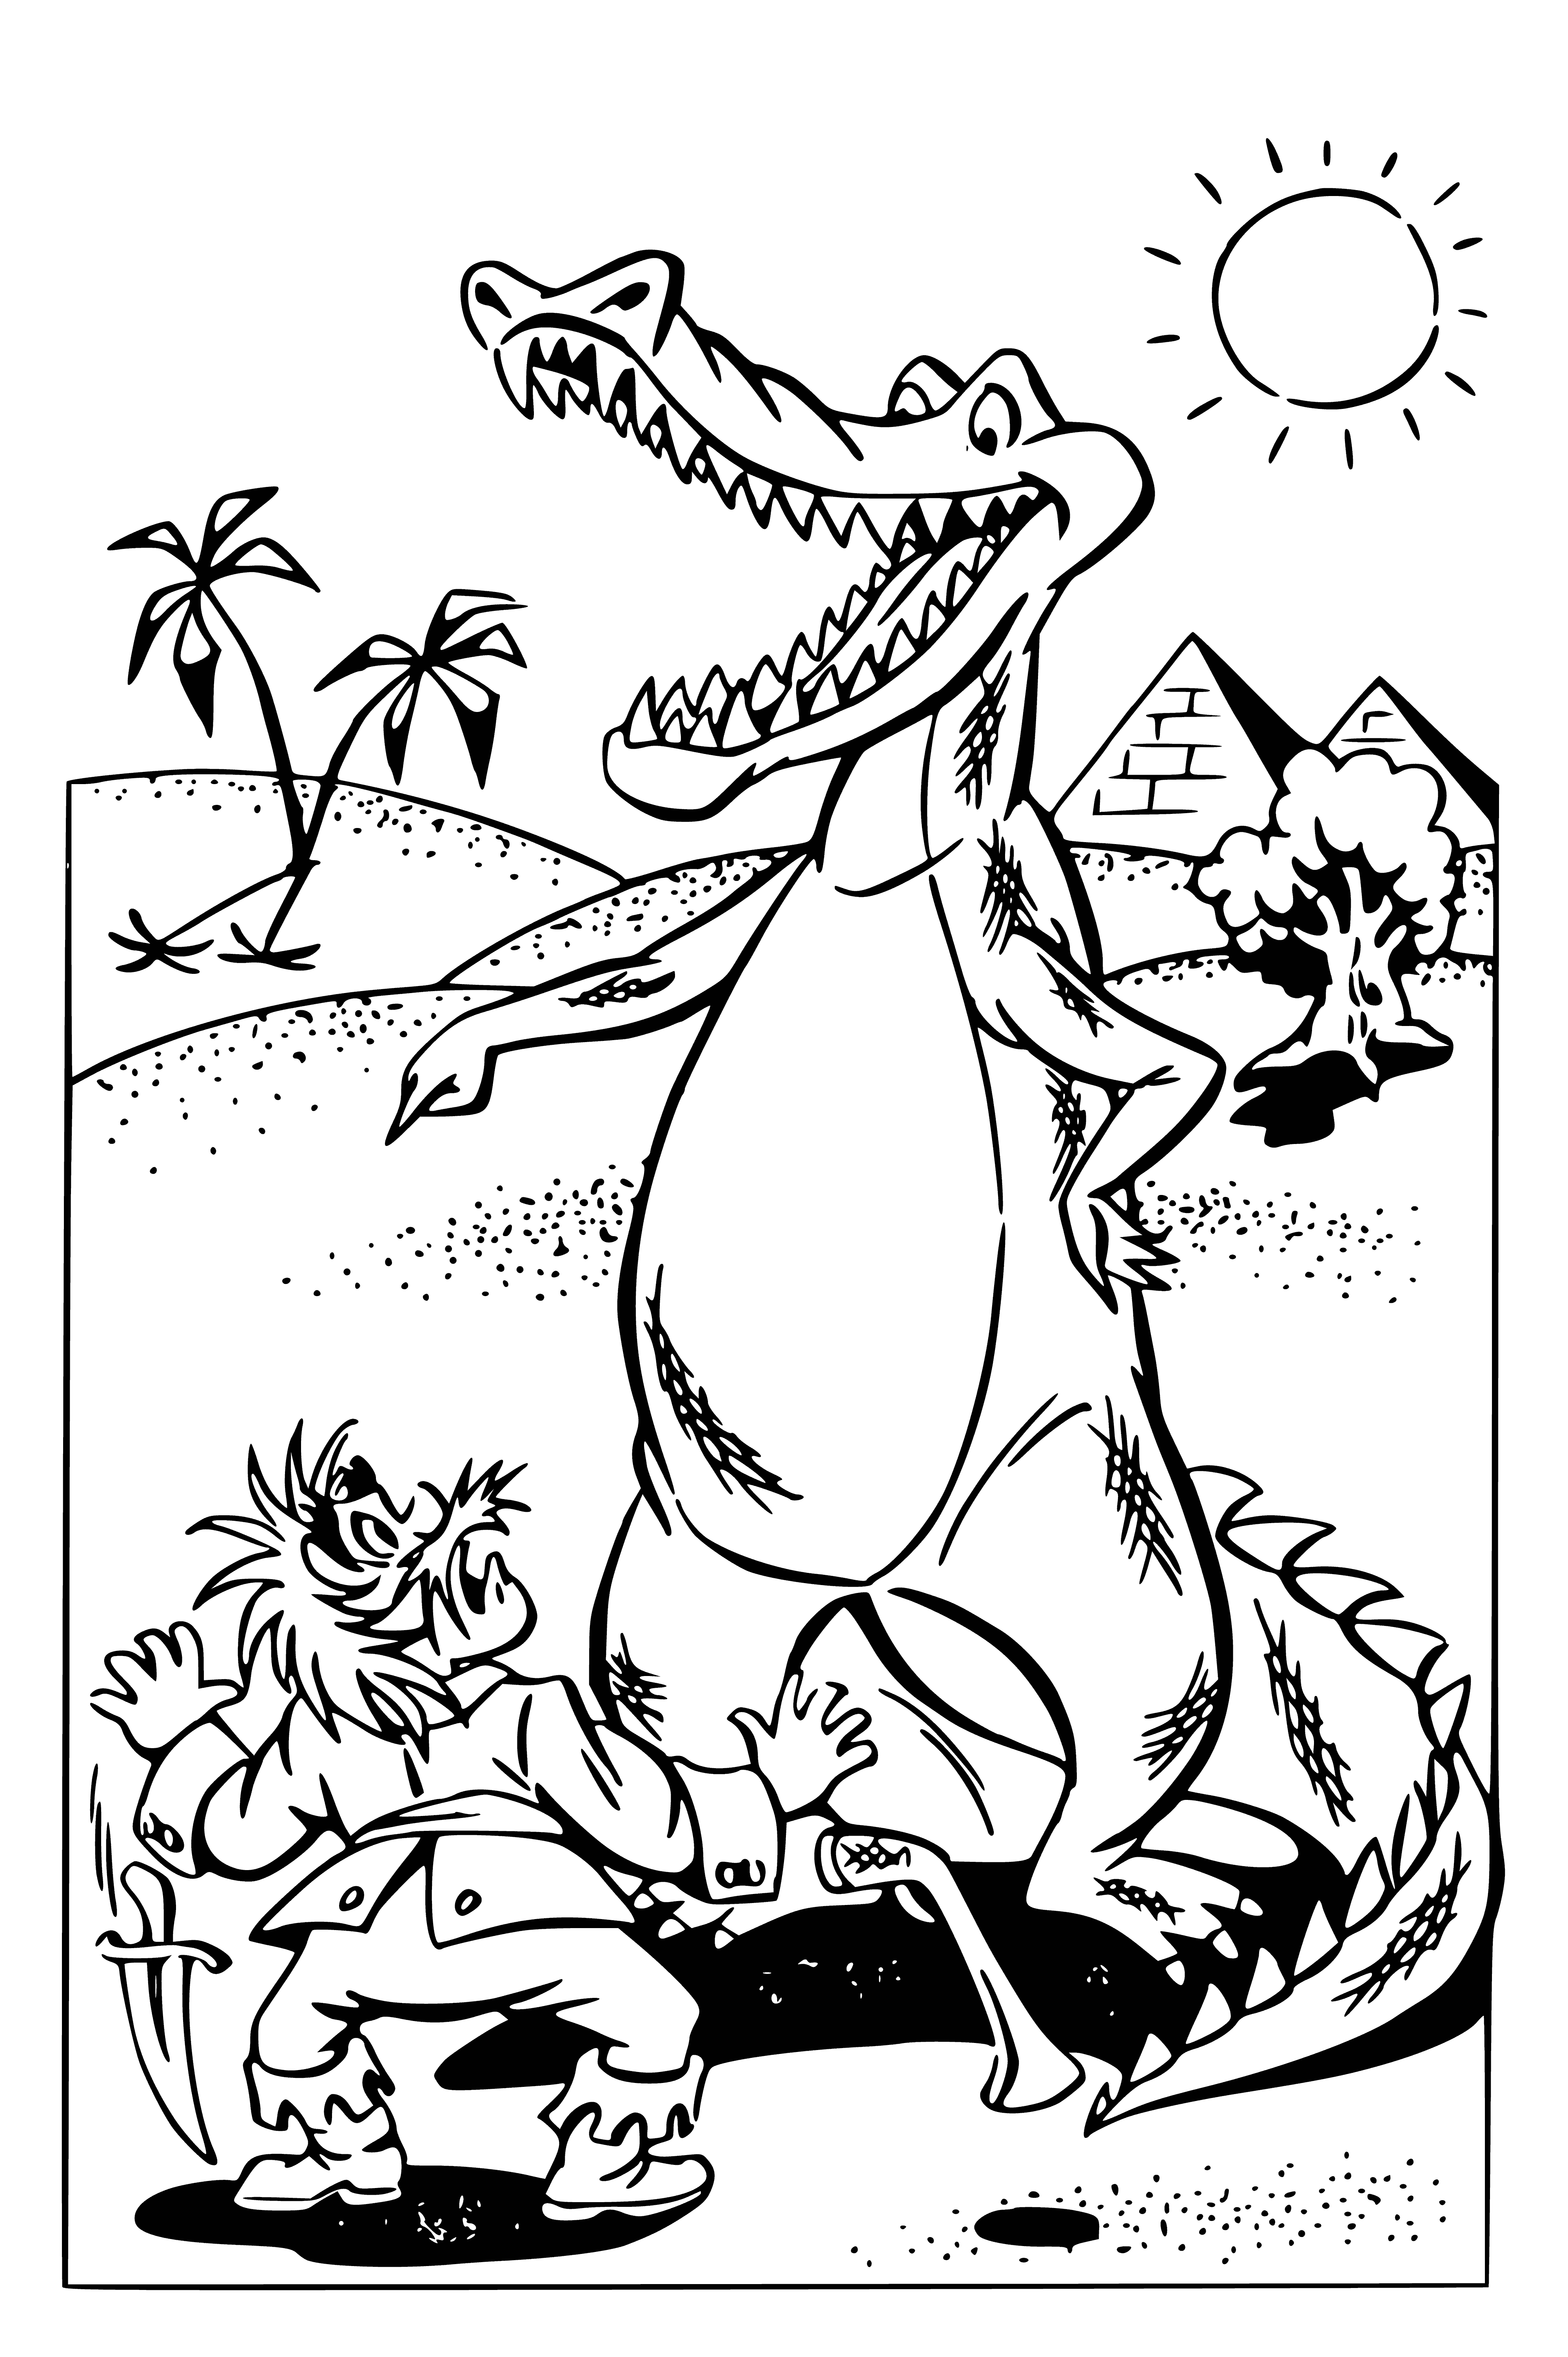 coloring page: Crocodile in center of page, cat & dog on either side looking at it fearfully, the dog has a stick in its mouth.